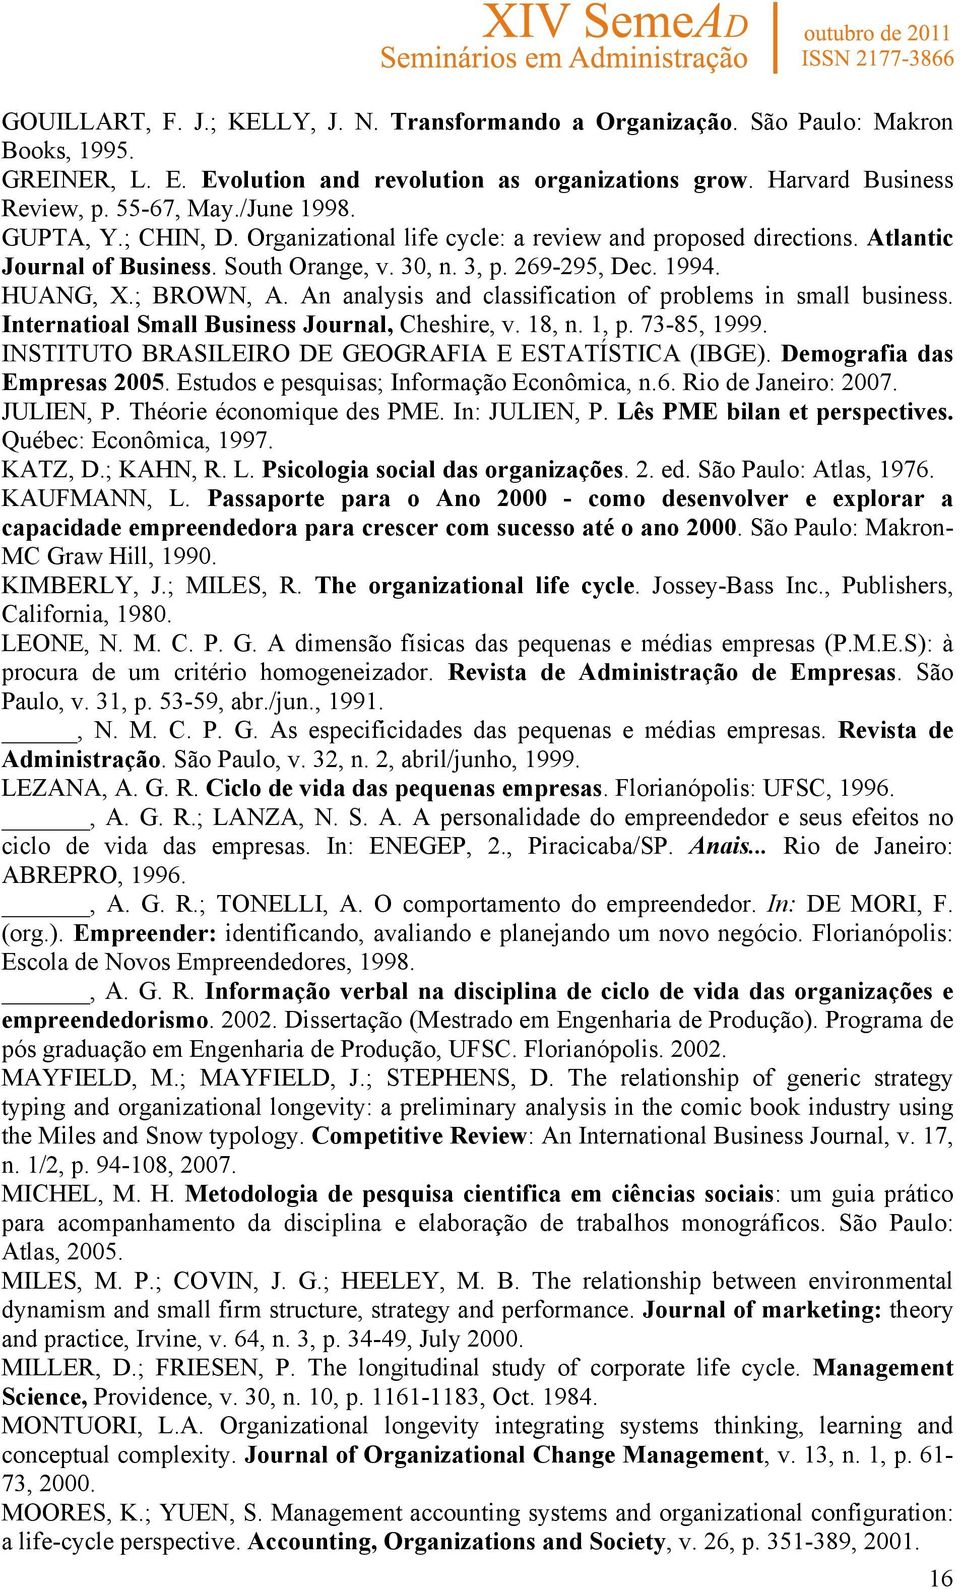 An analysis and classification of problems in small business. Internatioal Small Business Journal, Cheshire, v. 18, n. 1, p. 73-85, 1999. INSTITUTO BRASILEIRO DE GEOGRAFIA E ESTATÍSTICA (IBGE).